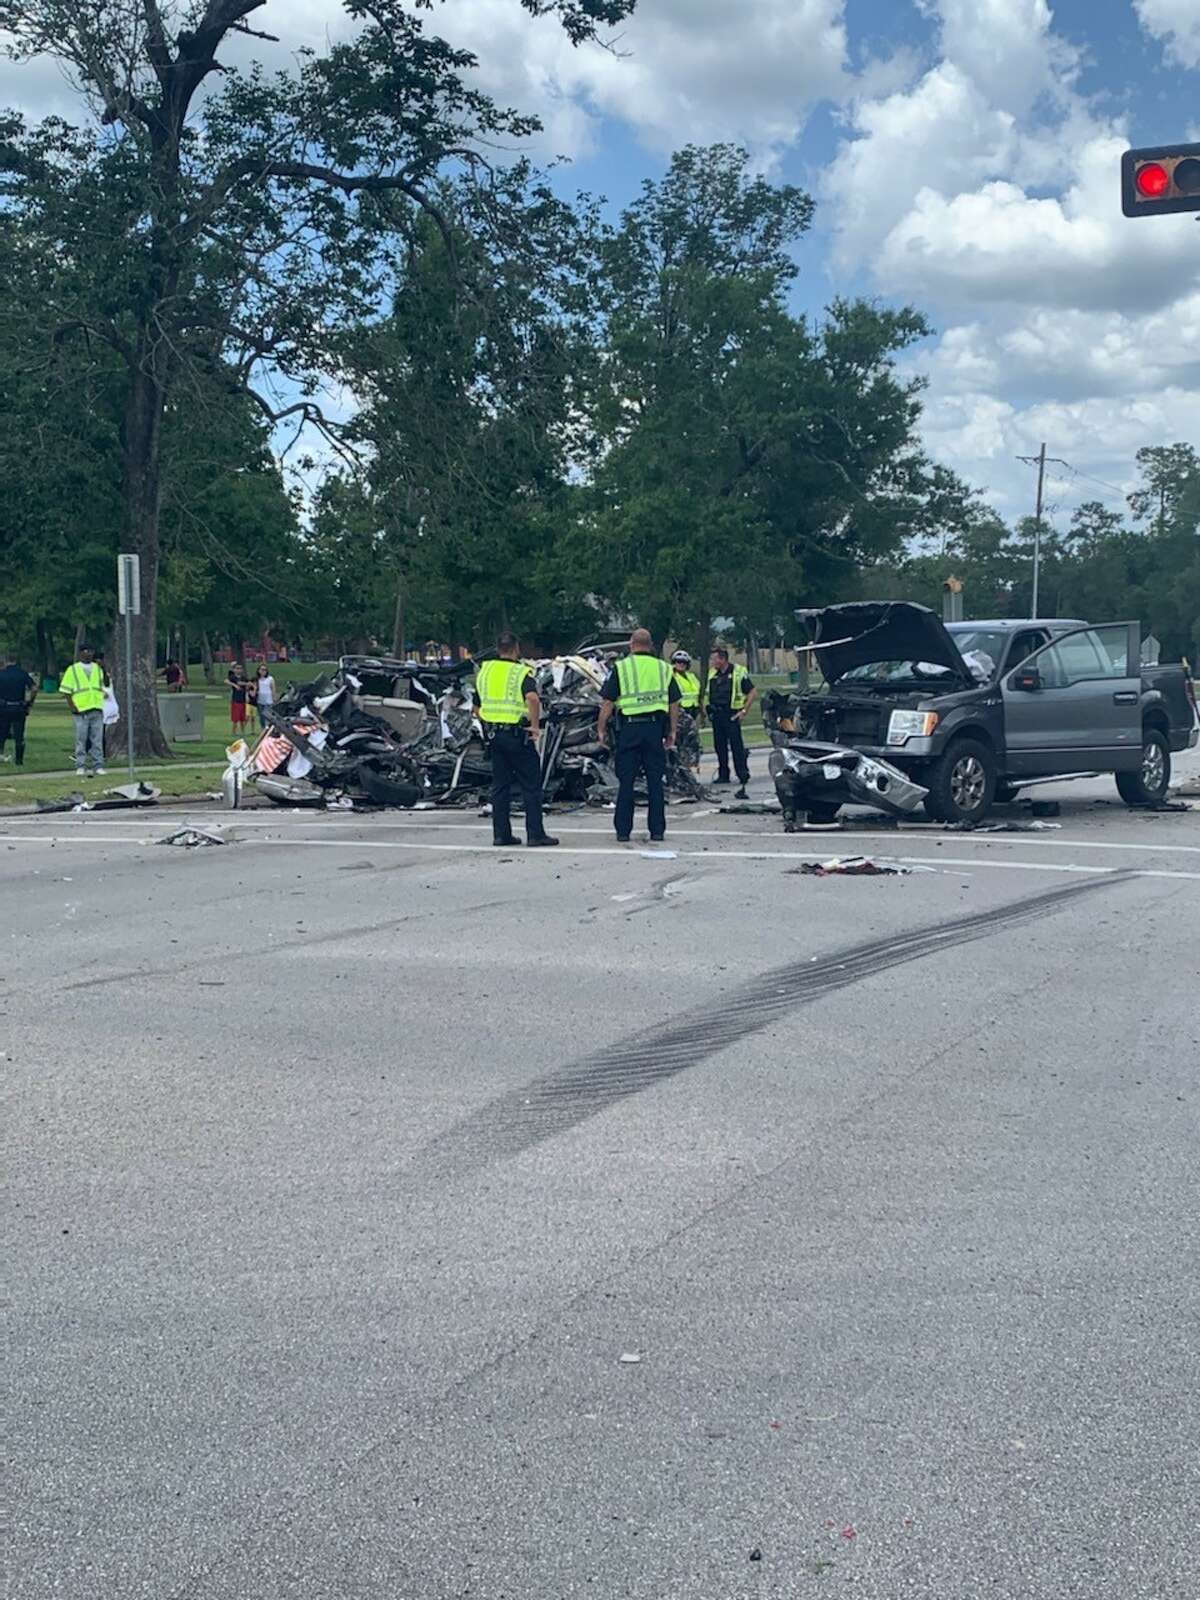 The Beaumont Police Department said officers are working to clear a crash involving six vehicles. Police said there were no life- threatening injuries from the crash that occurred in the area of Dowlen Road and Gladys Avenue on Wednesday.